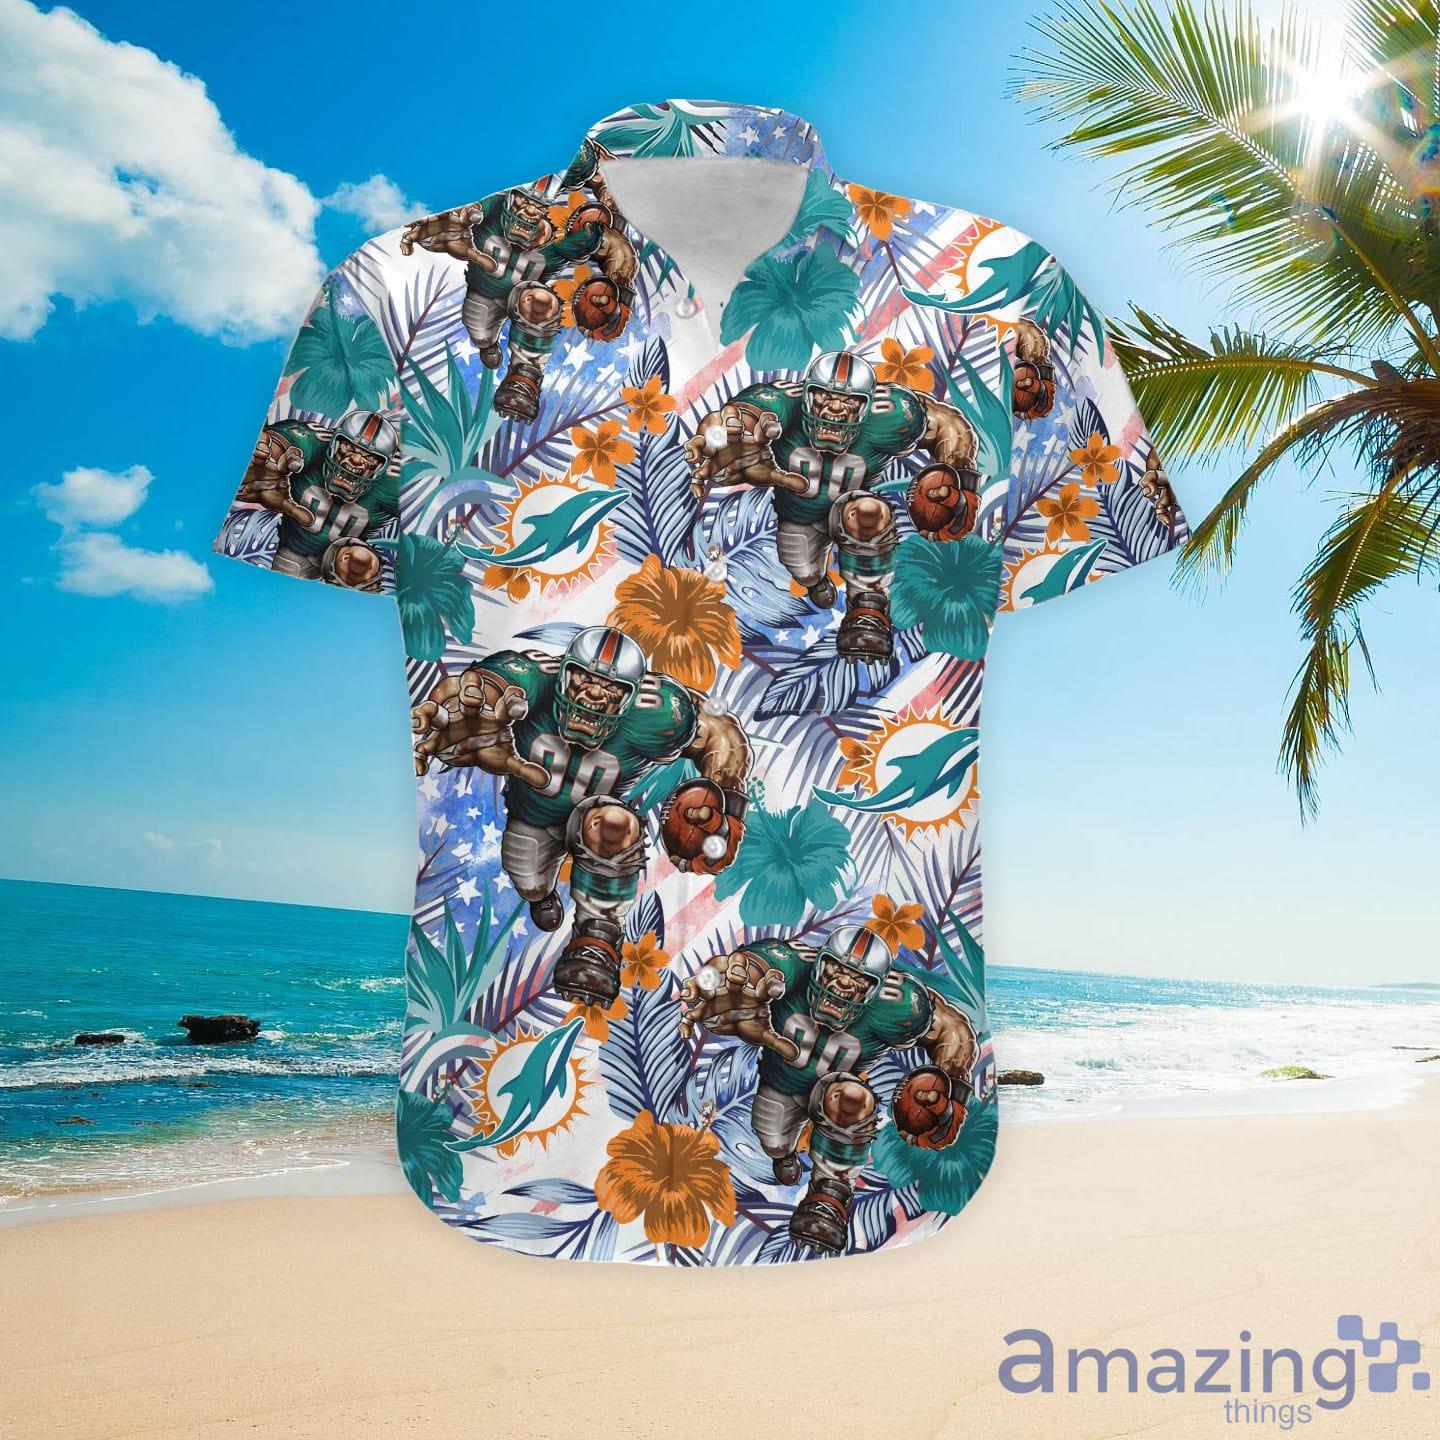 miami dolphins floral shirt